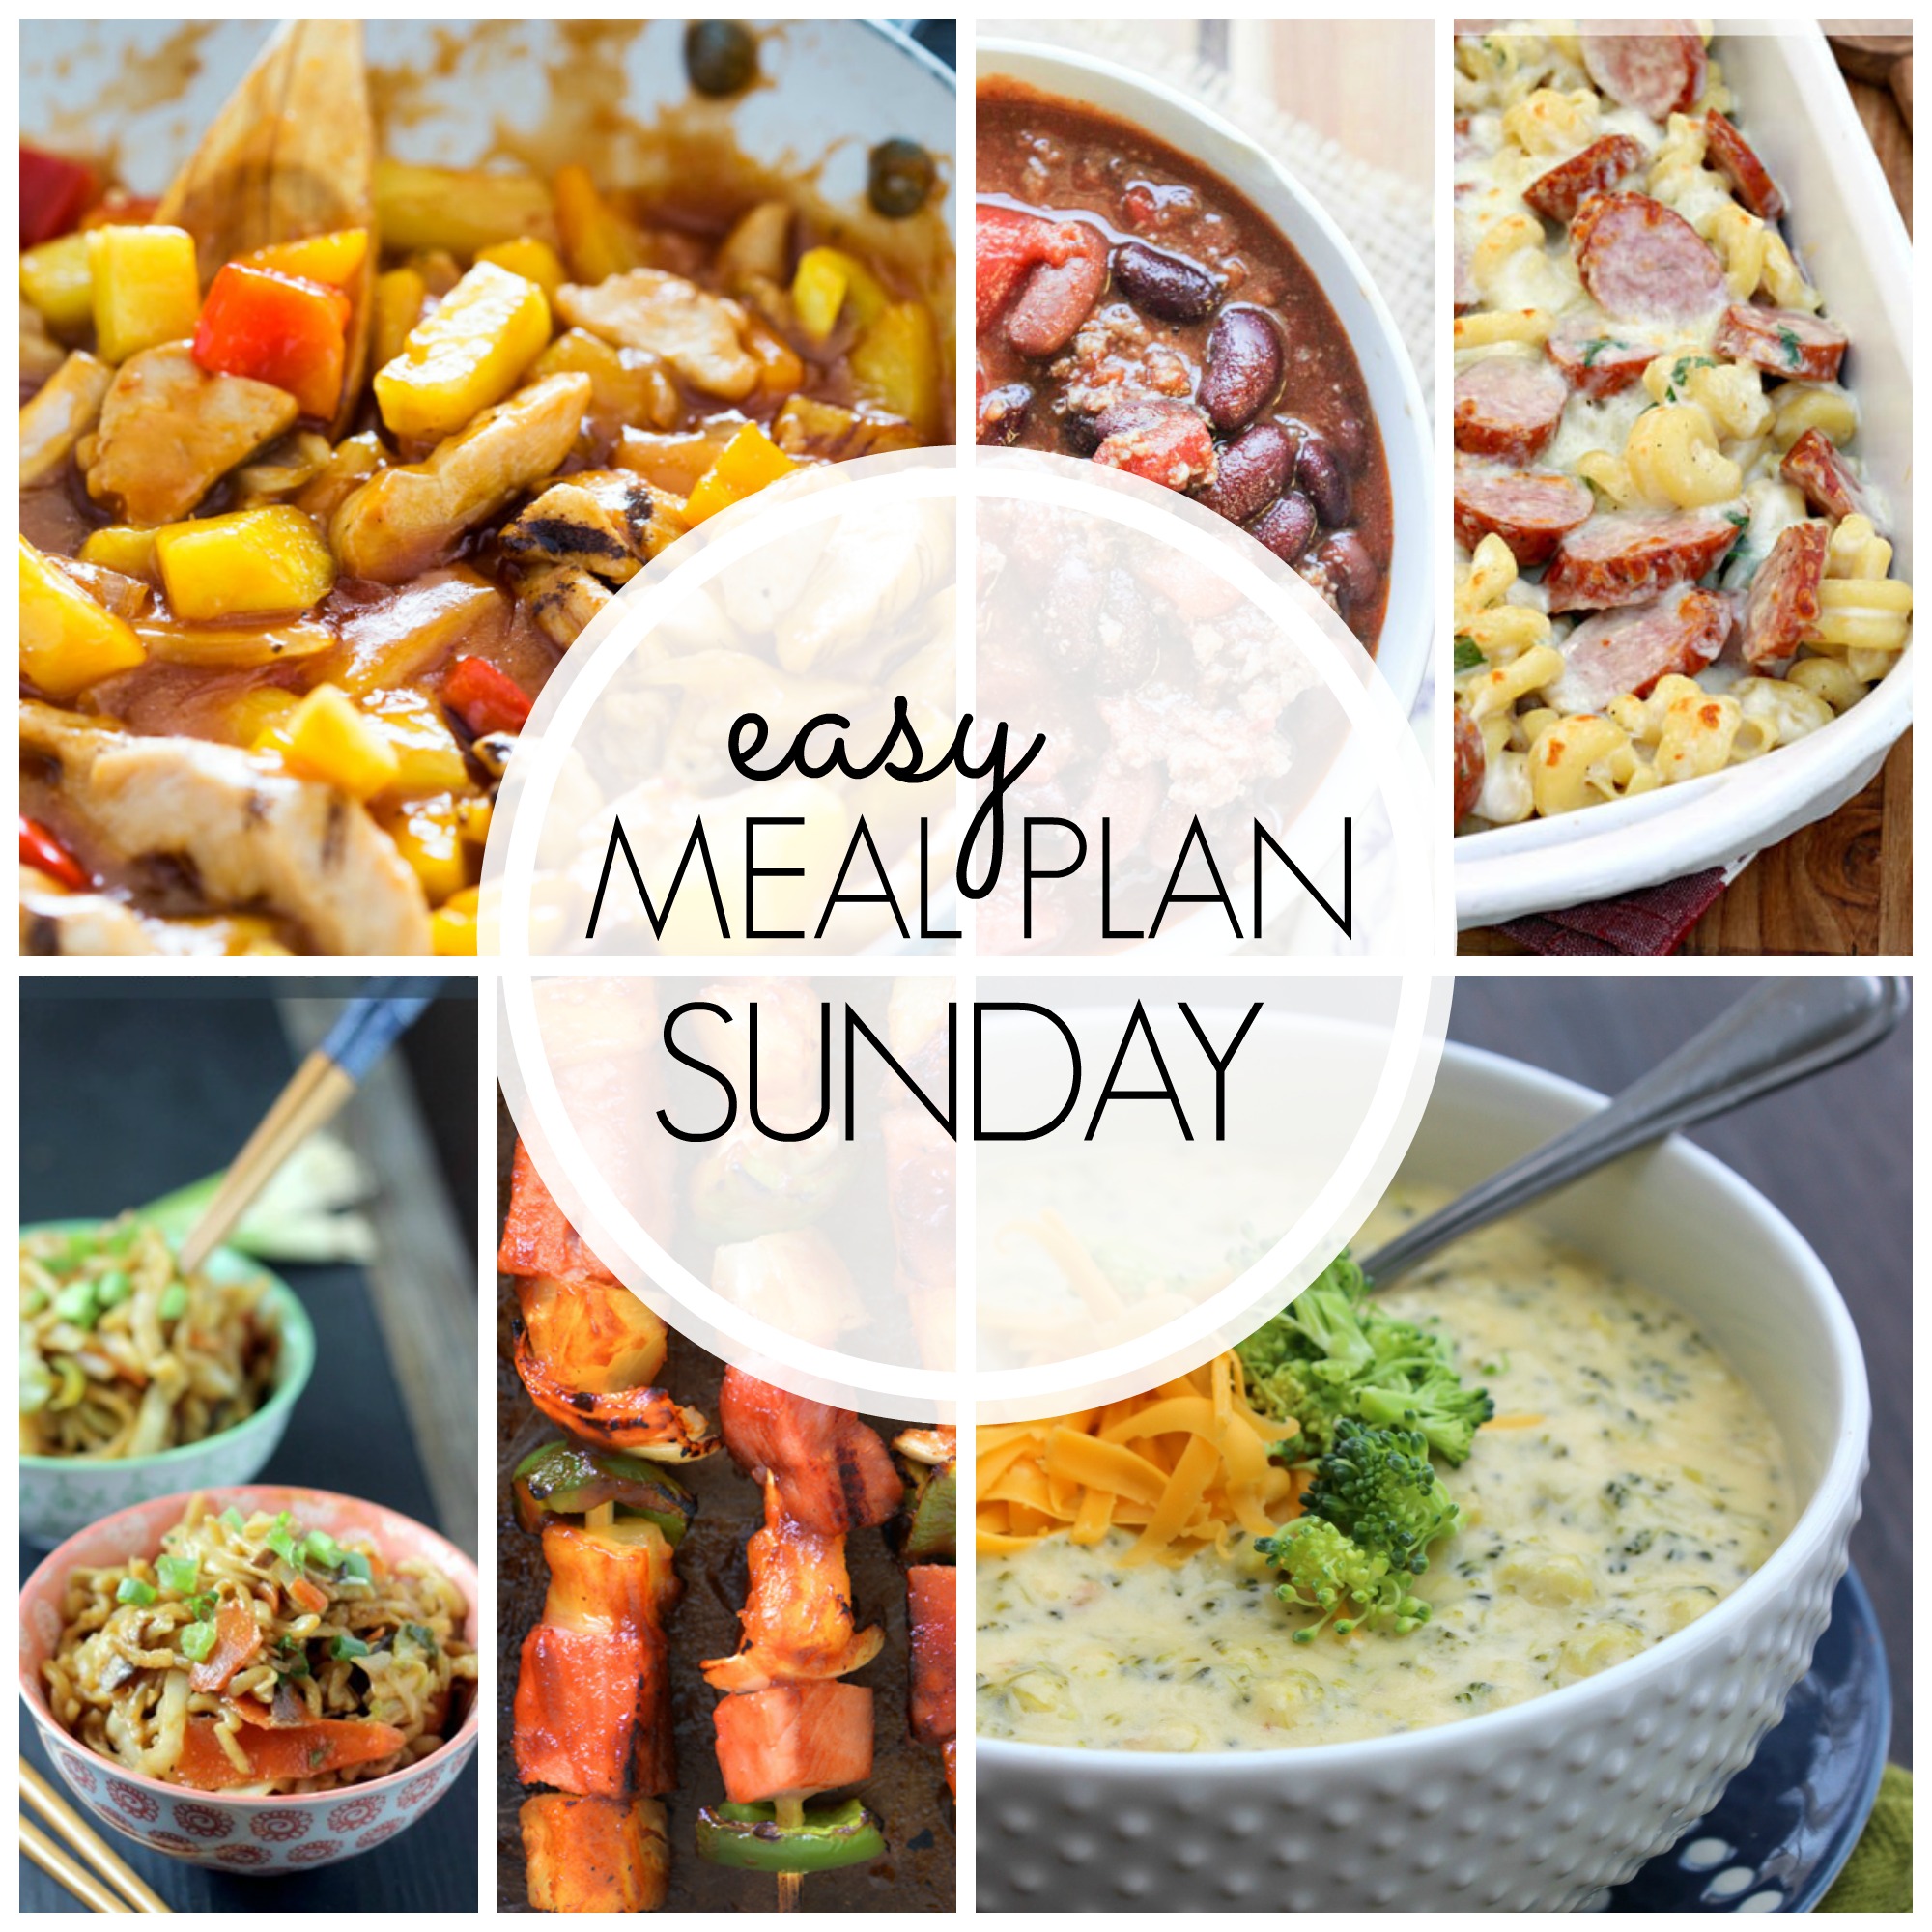 Easy Meal Plan Sunday #45